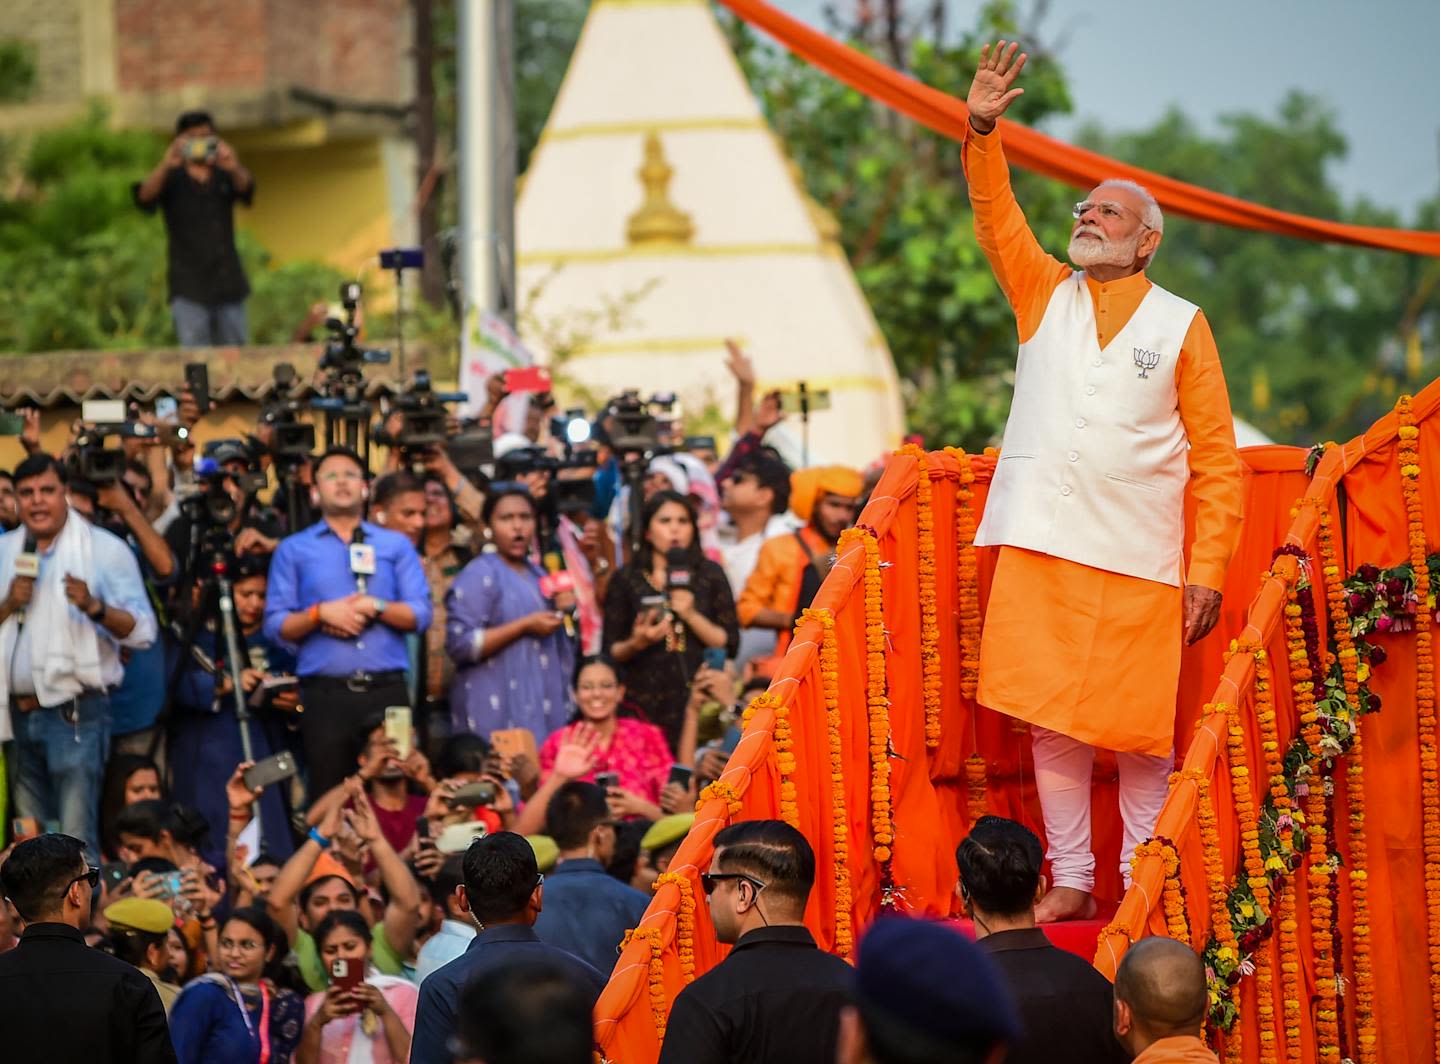 Modi’s anti-Muslim rhetoric taps into Hindu replacement fears that trace back to colonial India